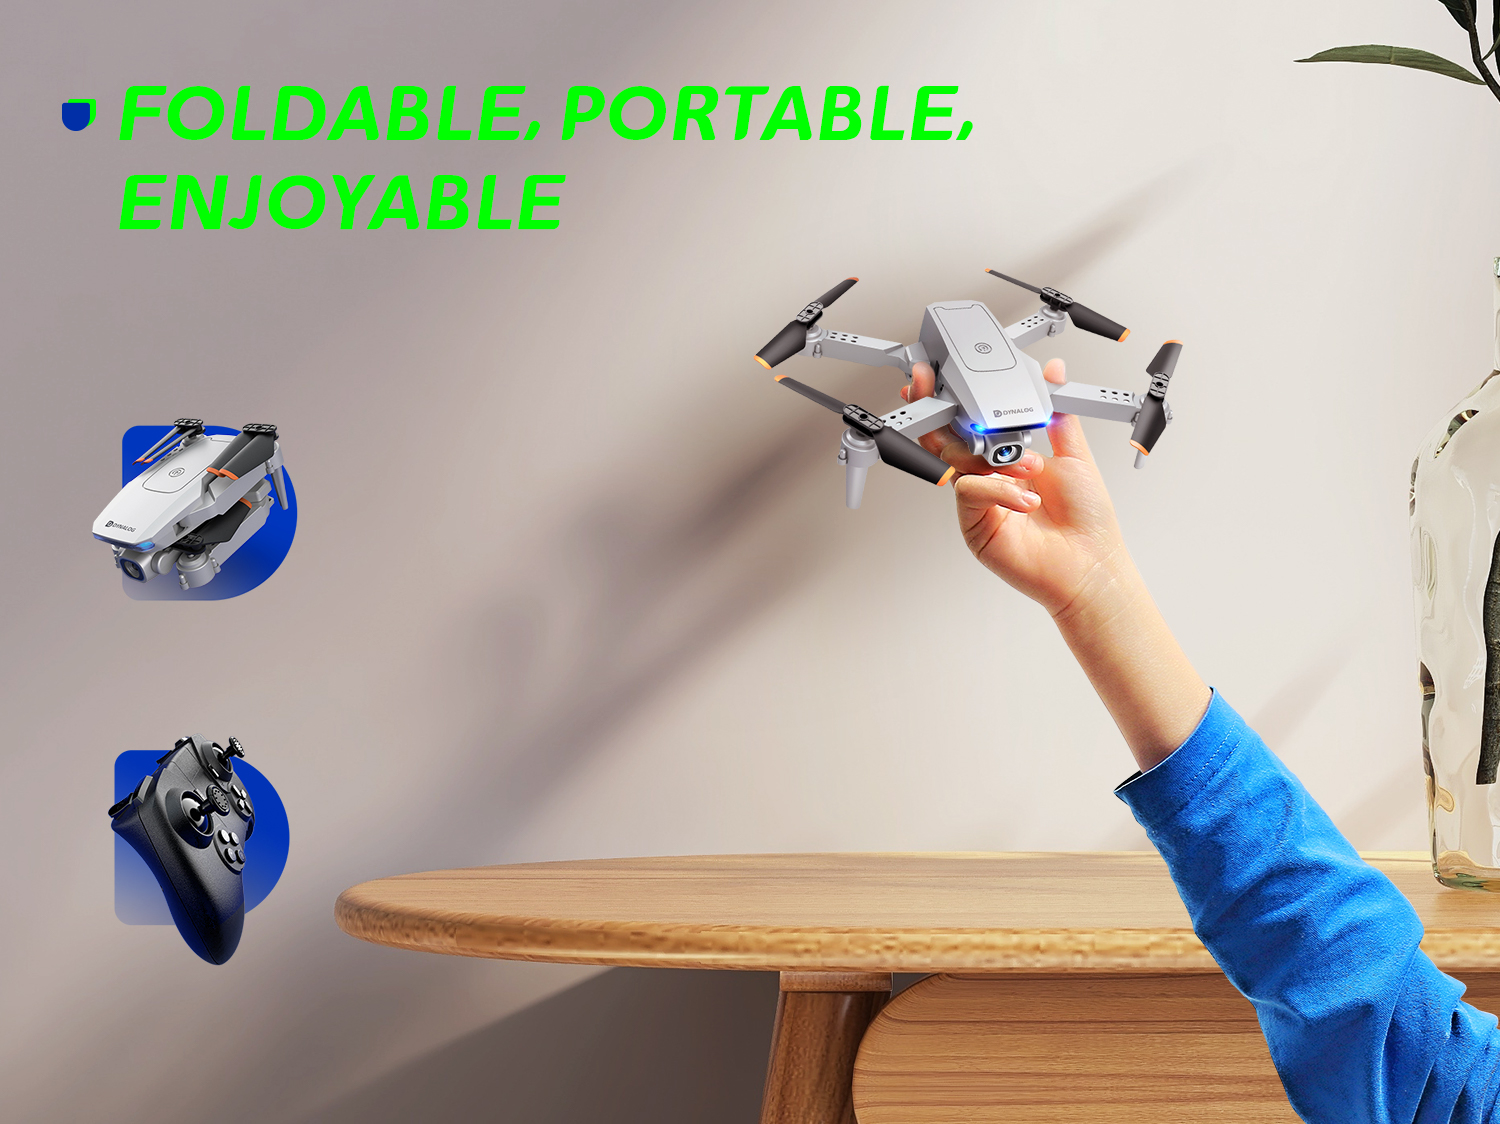 Dynalog 1080P Mini Foldable Drone with HD Camera FPV Wifi RC Quadcopter, Voice Control, Gesture Control, Trajectory Flight, Circle Fly, High-Speed Rotation, 3D Flips, Headless Mode - image 5 of 7